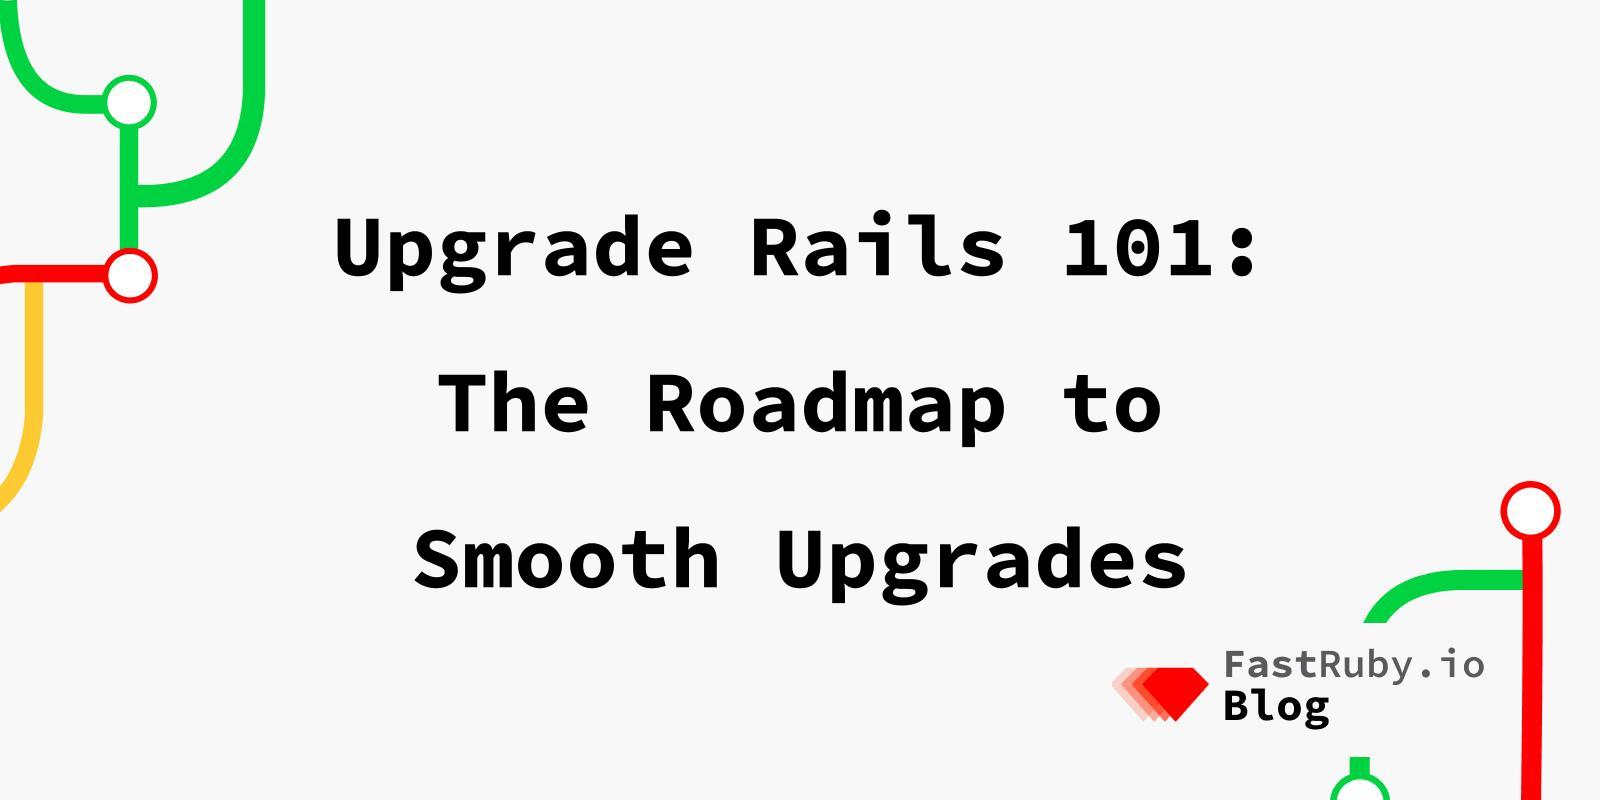 Upgrade Rails 101: The Roadmap to Smooth Upgrades